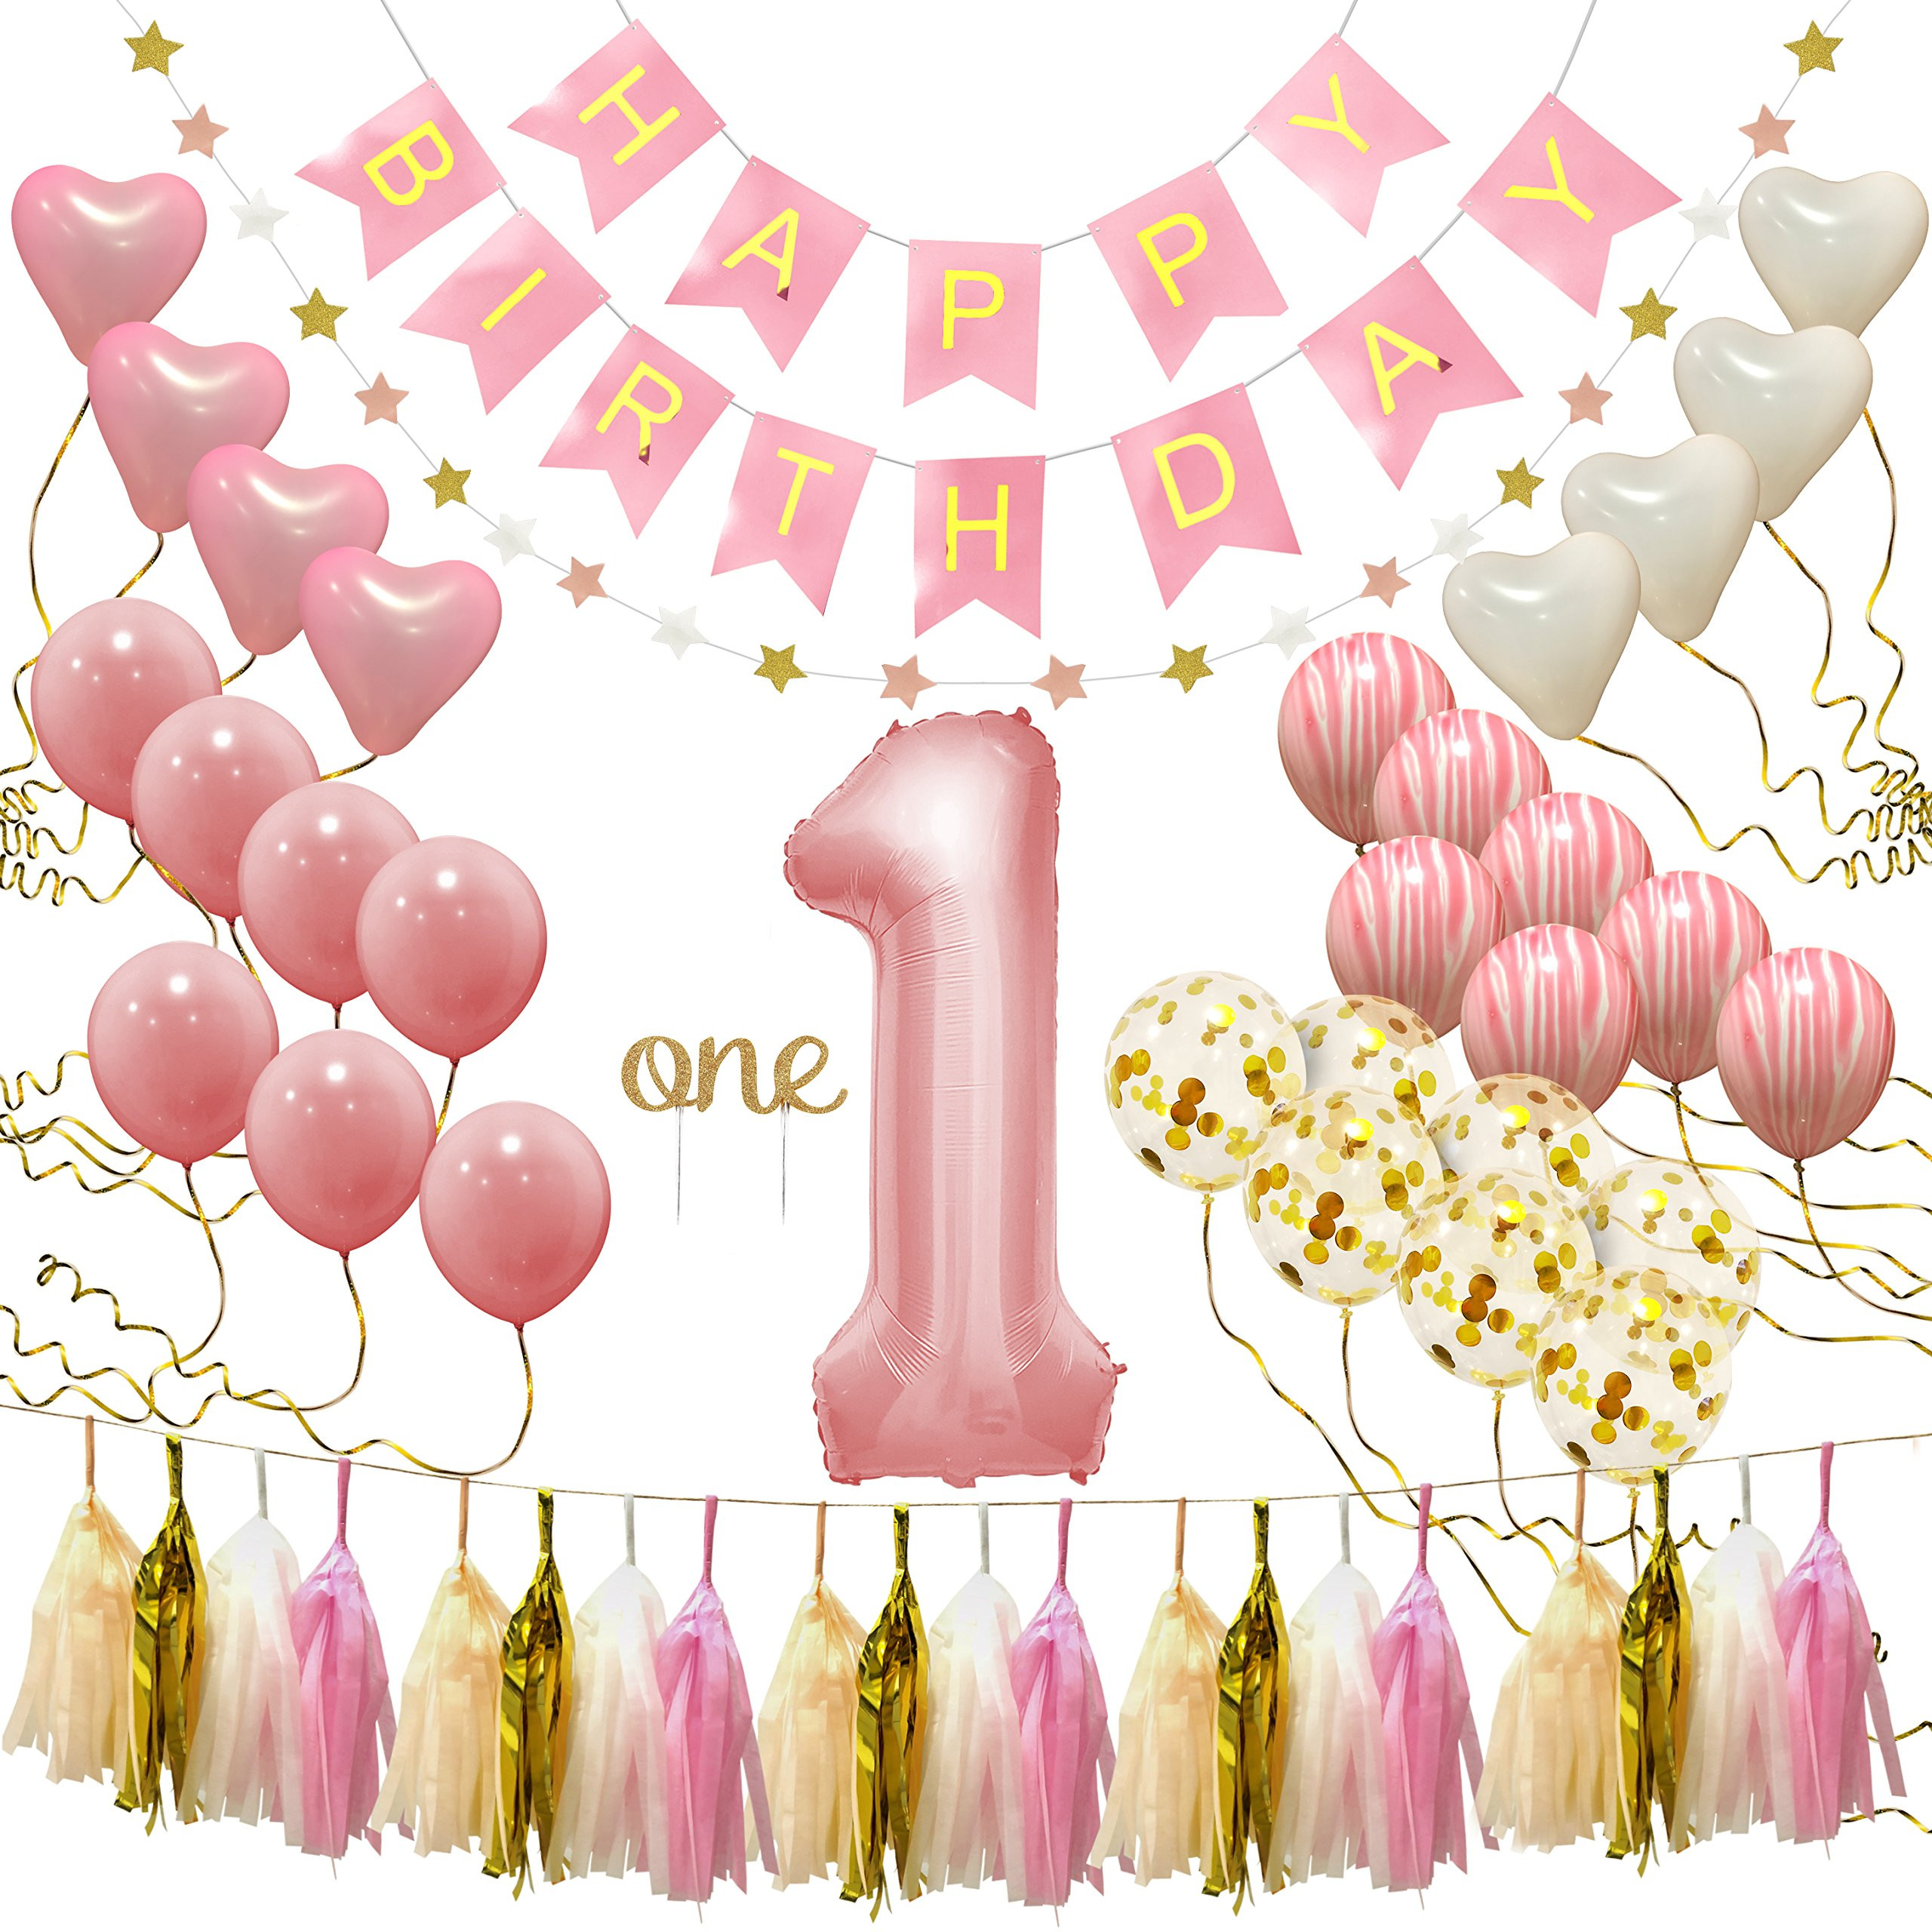 Baby Girl Birthday Decoration Ideas
 First Birthday Decorations for Girl